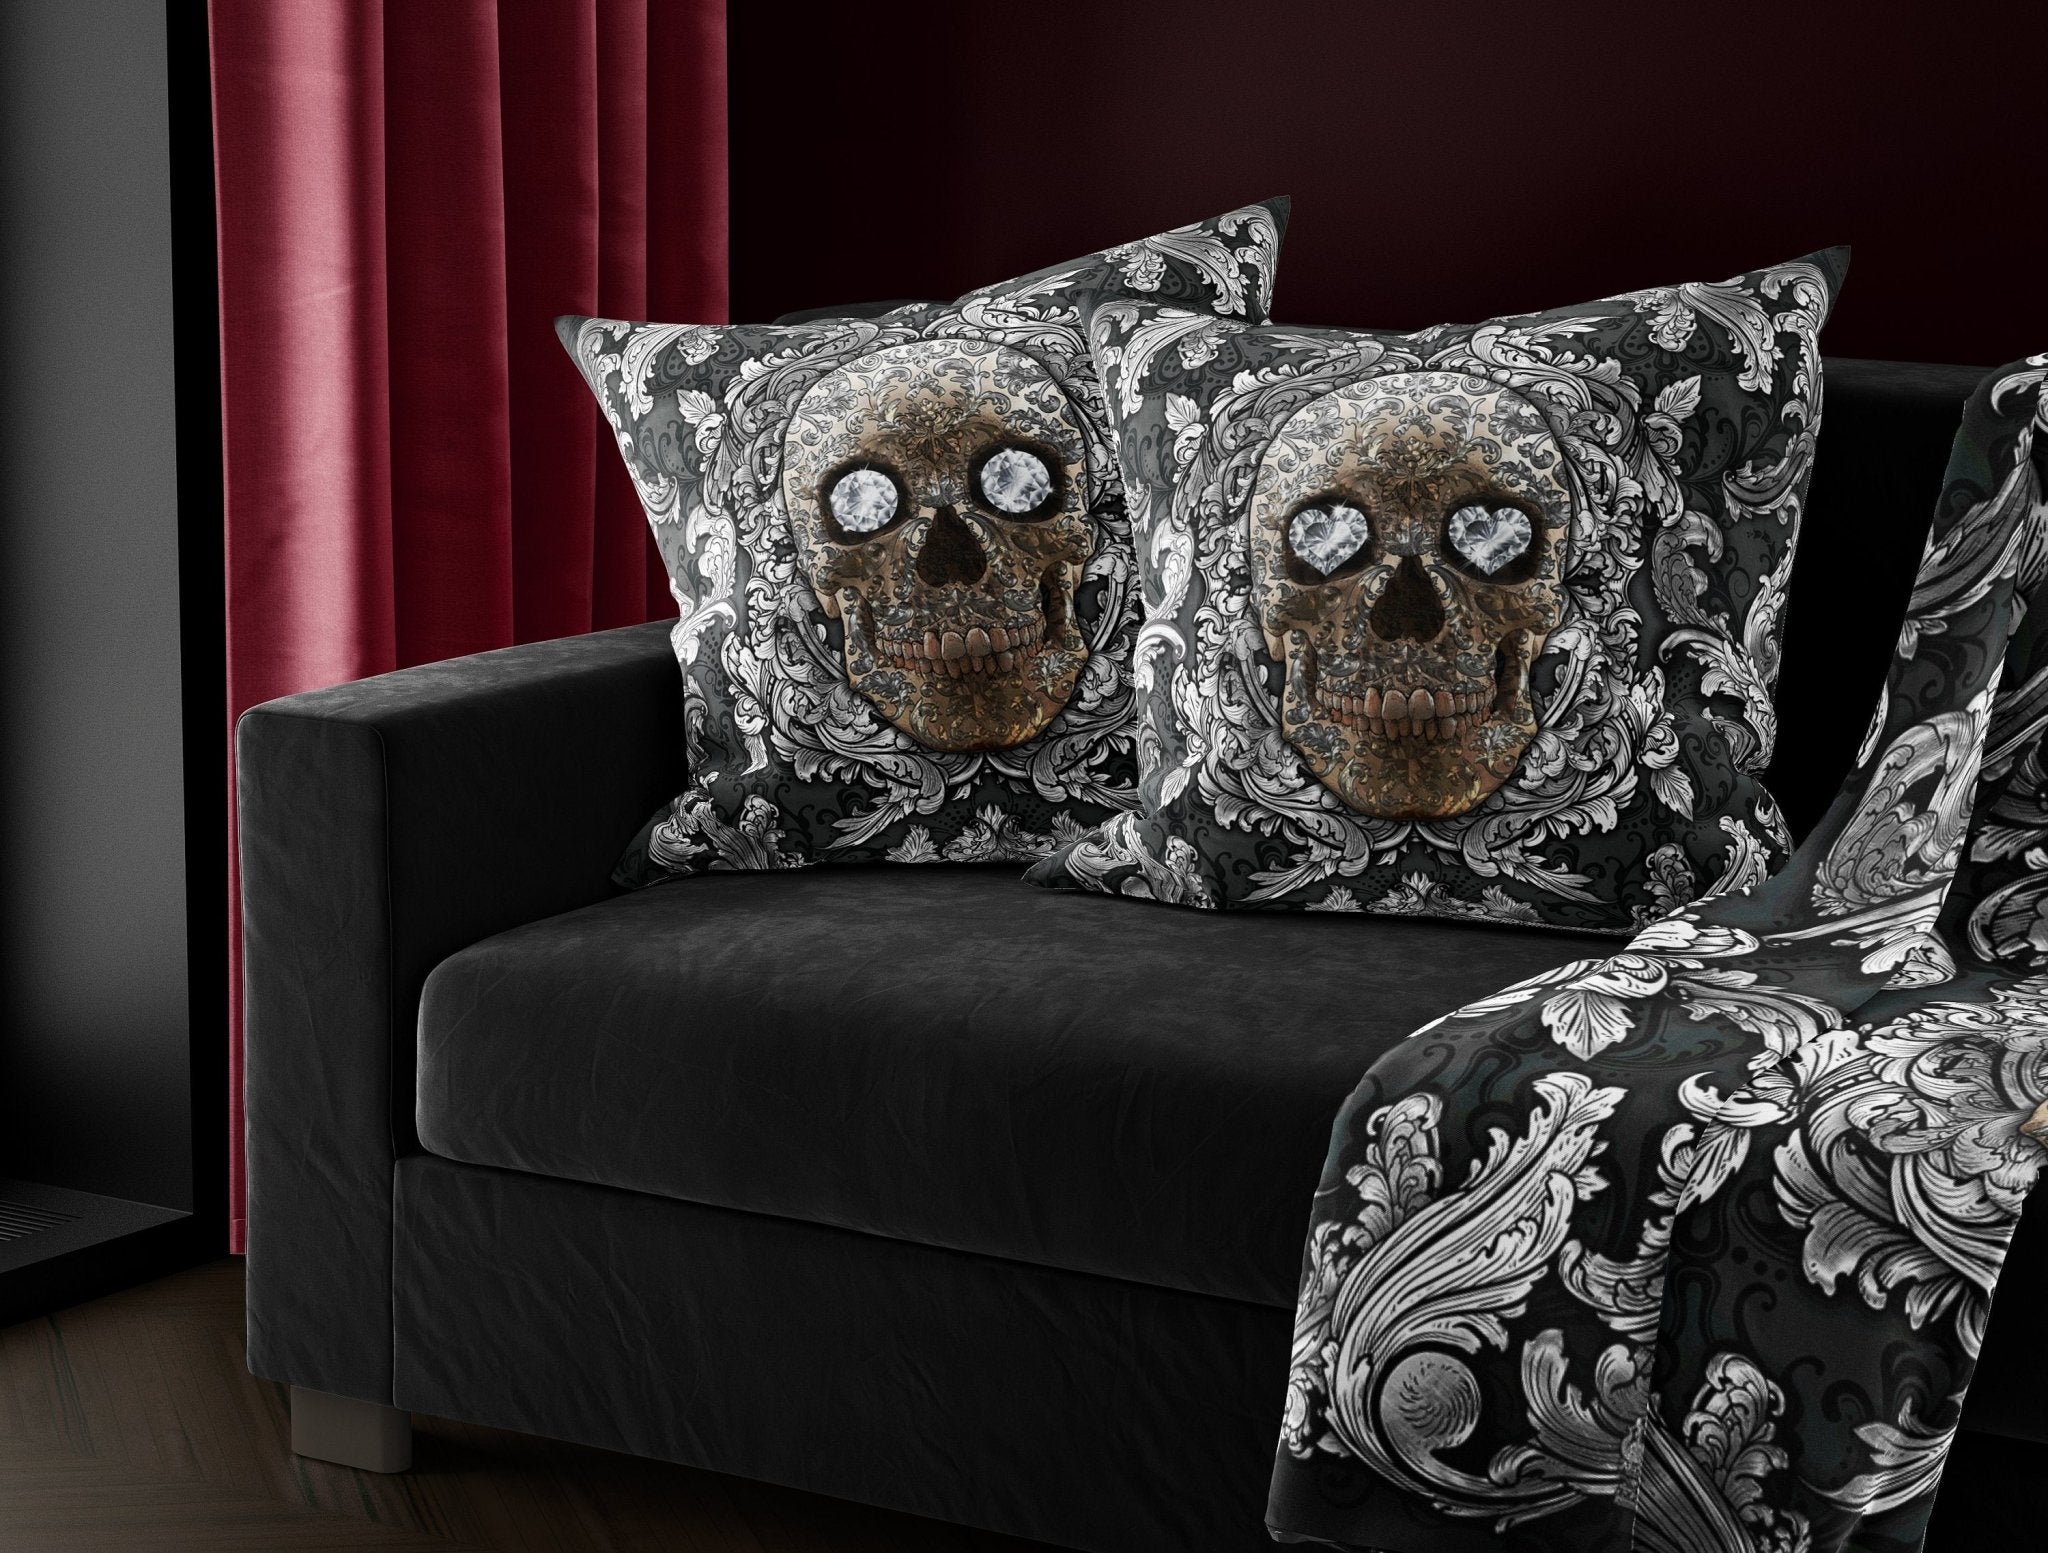 Skull Throw Pillow, Decorative Accent Cushion, Victorian Goth Room Decor, Macabre Art, Alternative Home, Funky and Eclectic - Silver & Diamonds - Abysm Internal